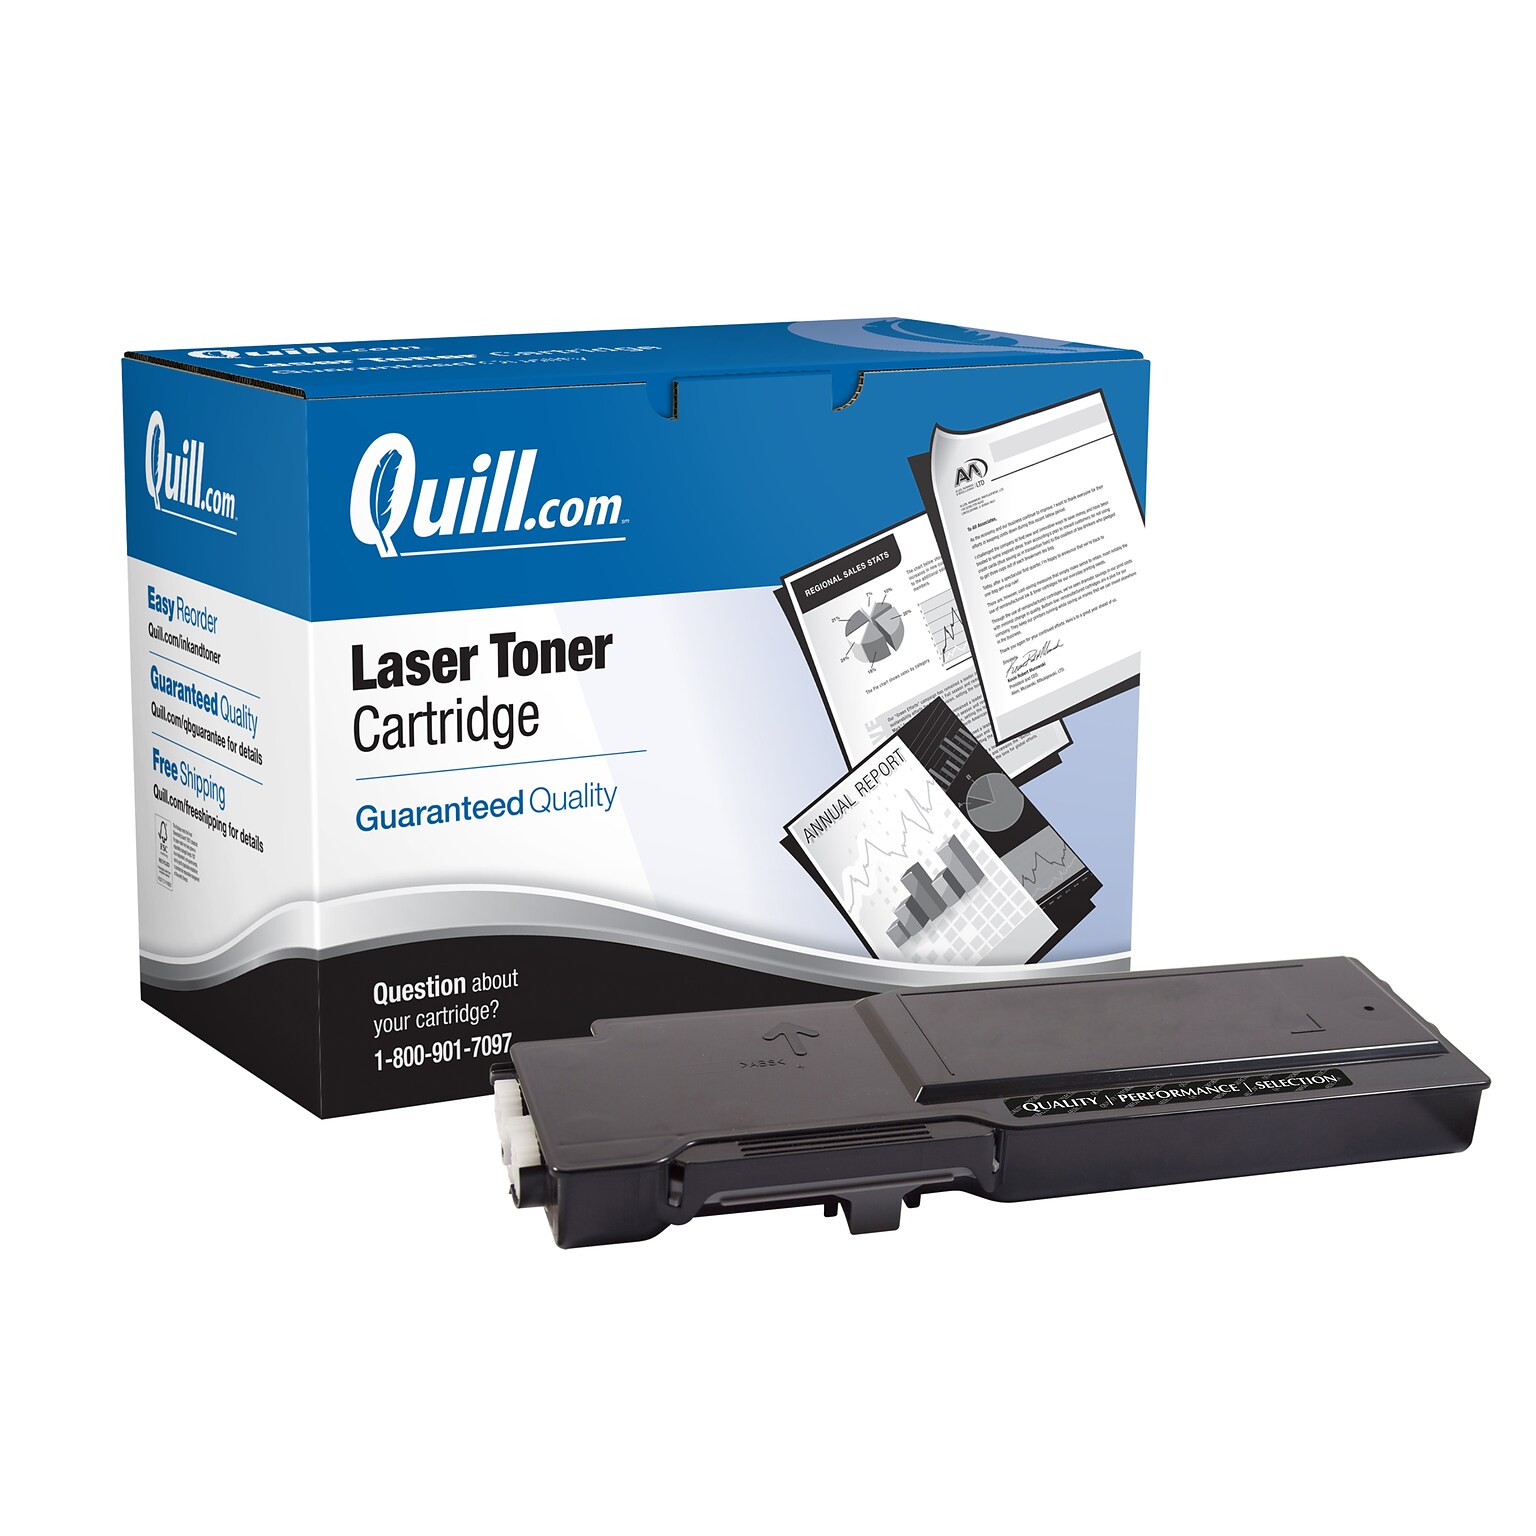 Quill Brand® Remanufactured Black High Yield Toner Cartridge Replacement for Xerox 6600/6605 (106R02228) (Lifetime Warranty)